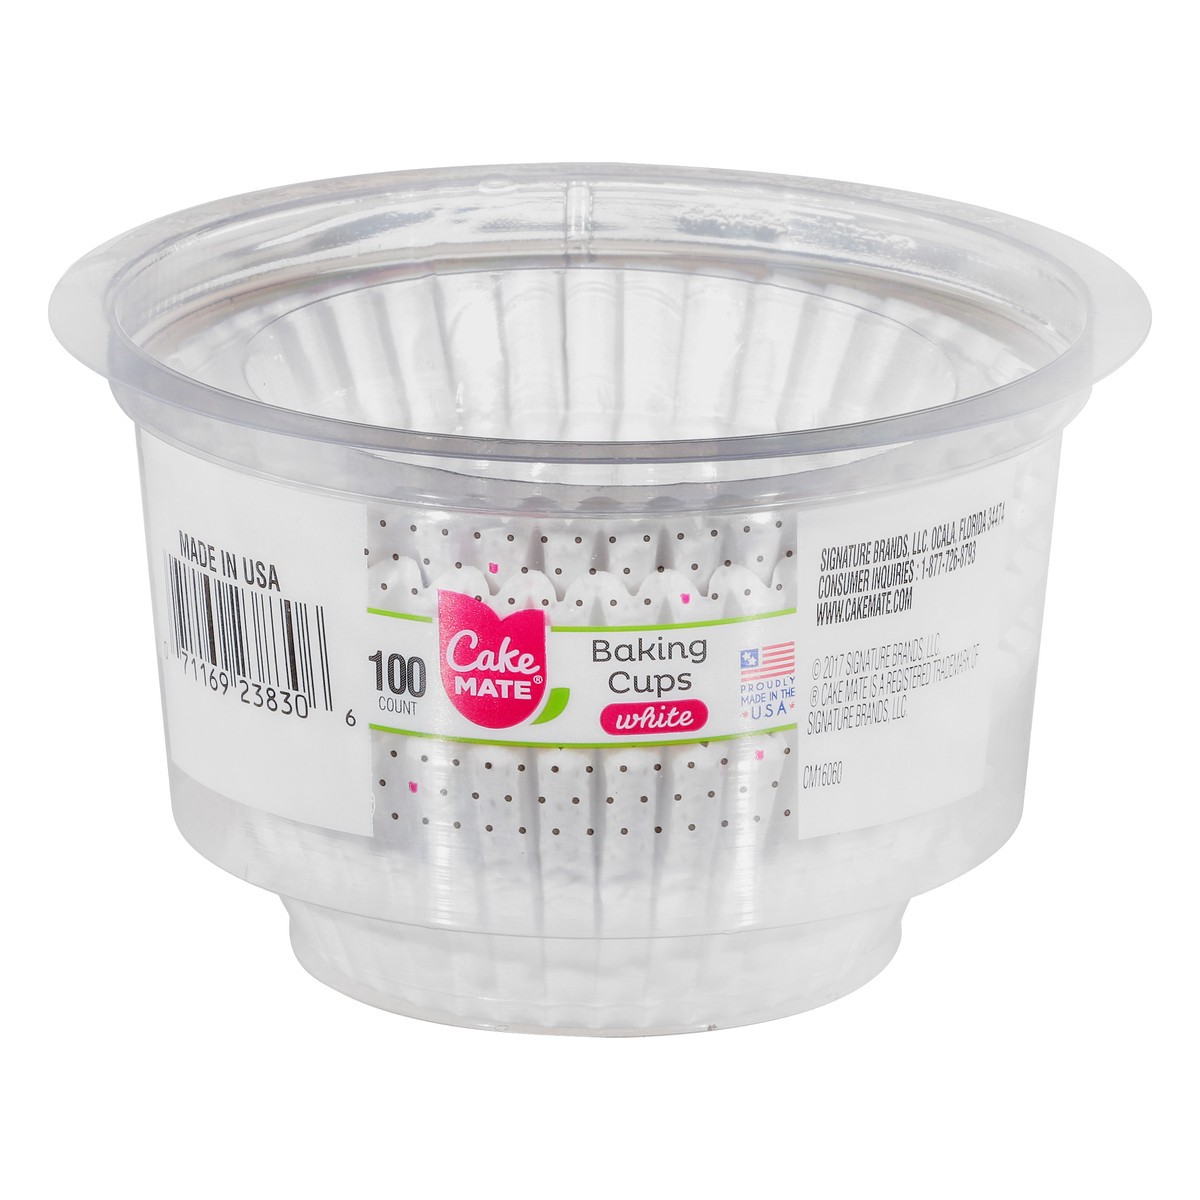 slide 1 of 9, Cake Mate Baking Cup White, 100 ct